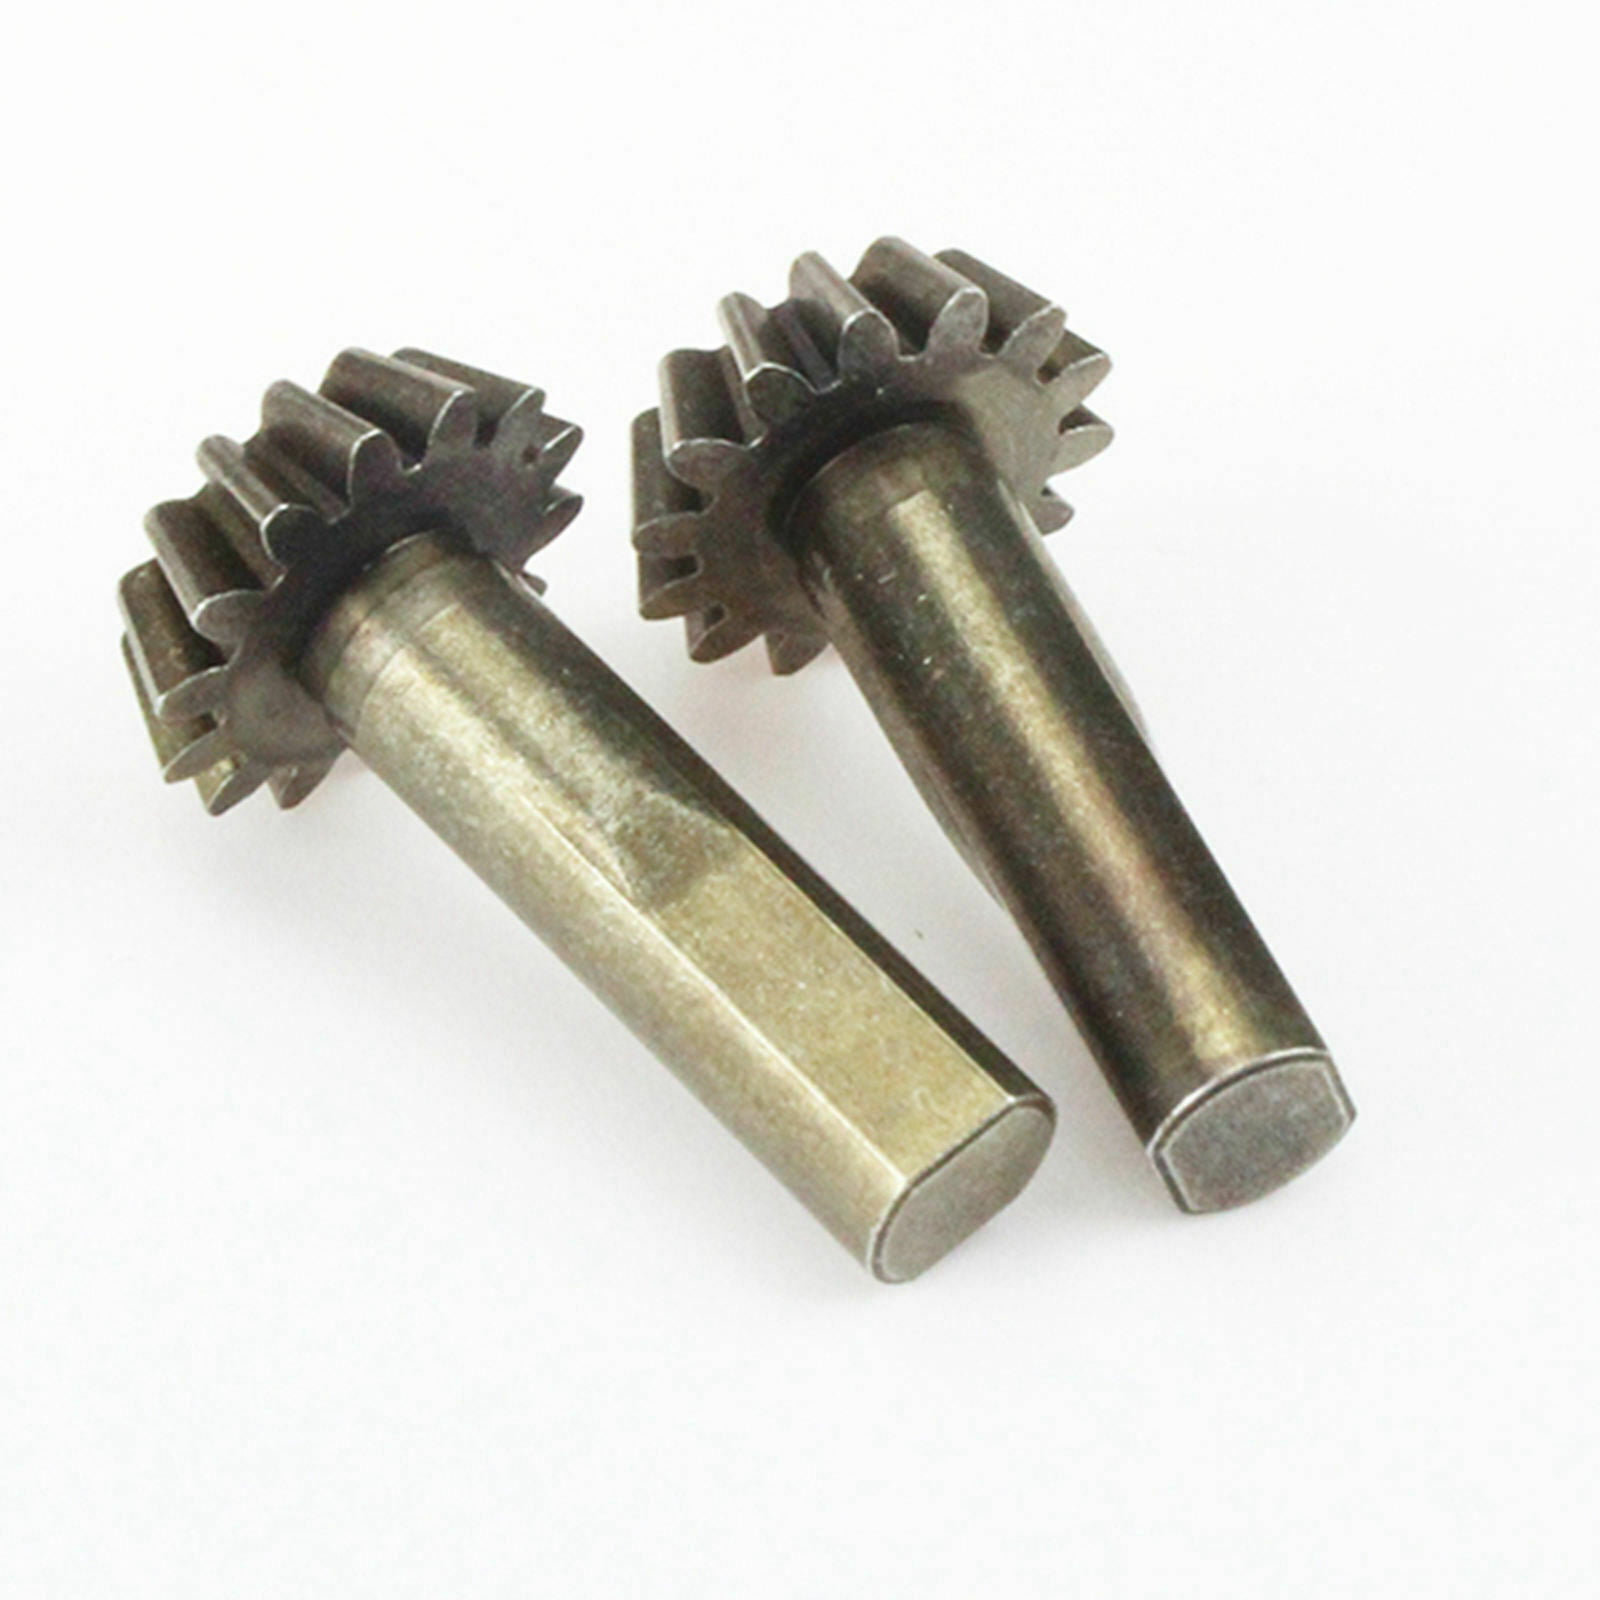 2Pack 1/10 RC Car Bevel Gear for WLtoys 104001 2.4G High Speed Racing Car Model